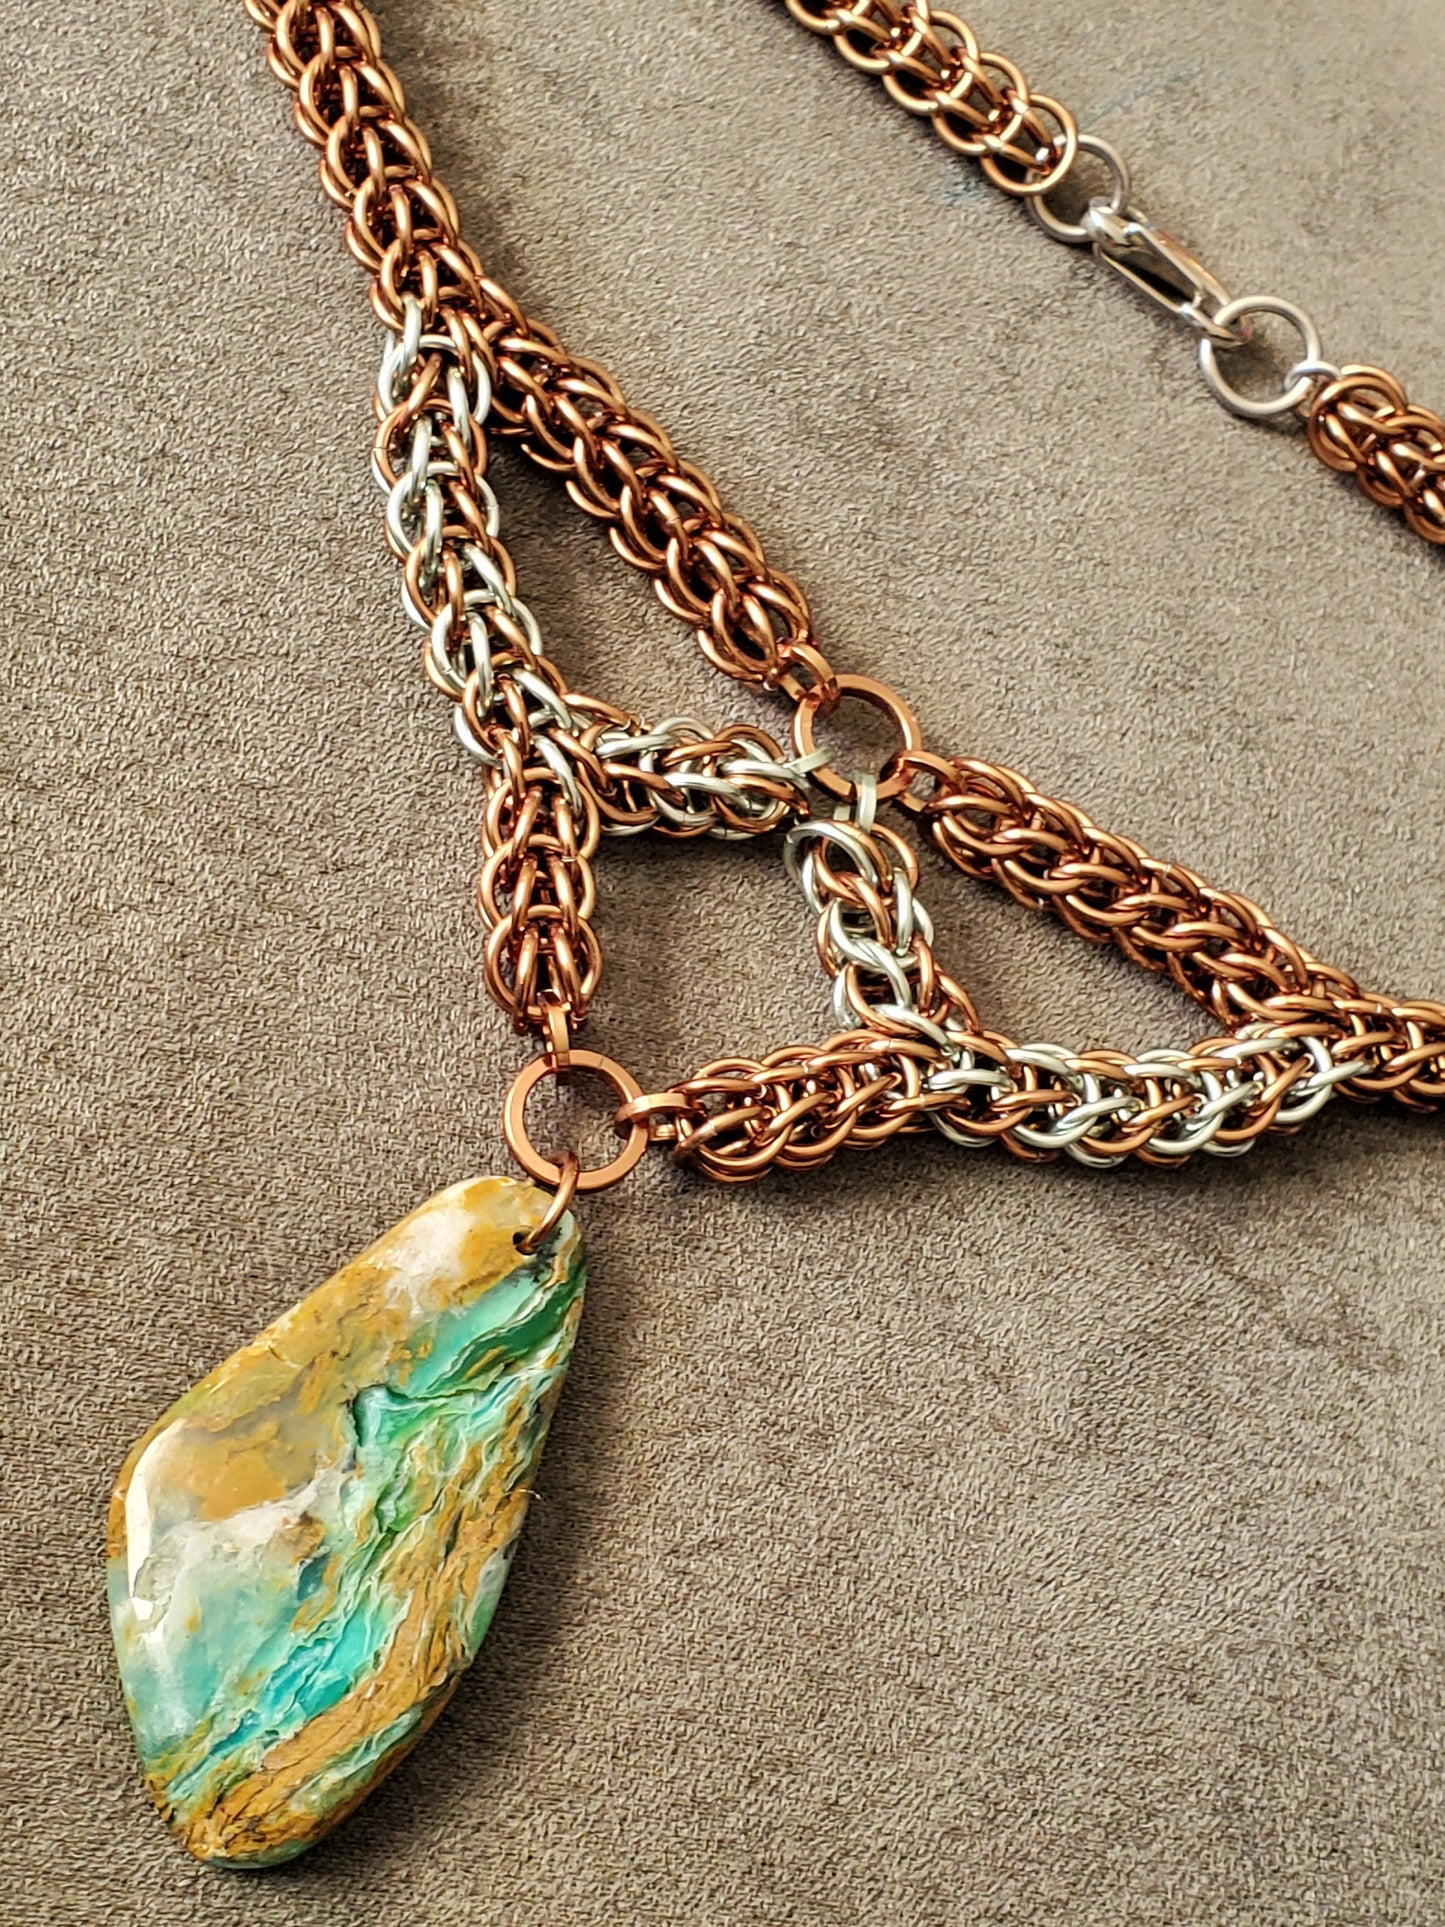 Bronze and Seafoam Full Persian necklace with Gerry Green Jasper stone pendant